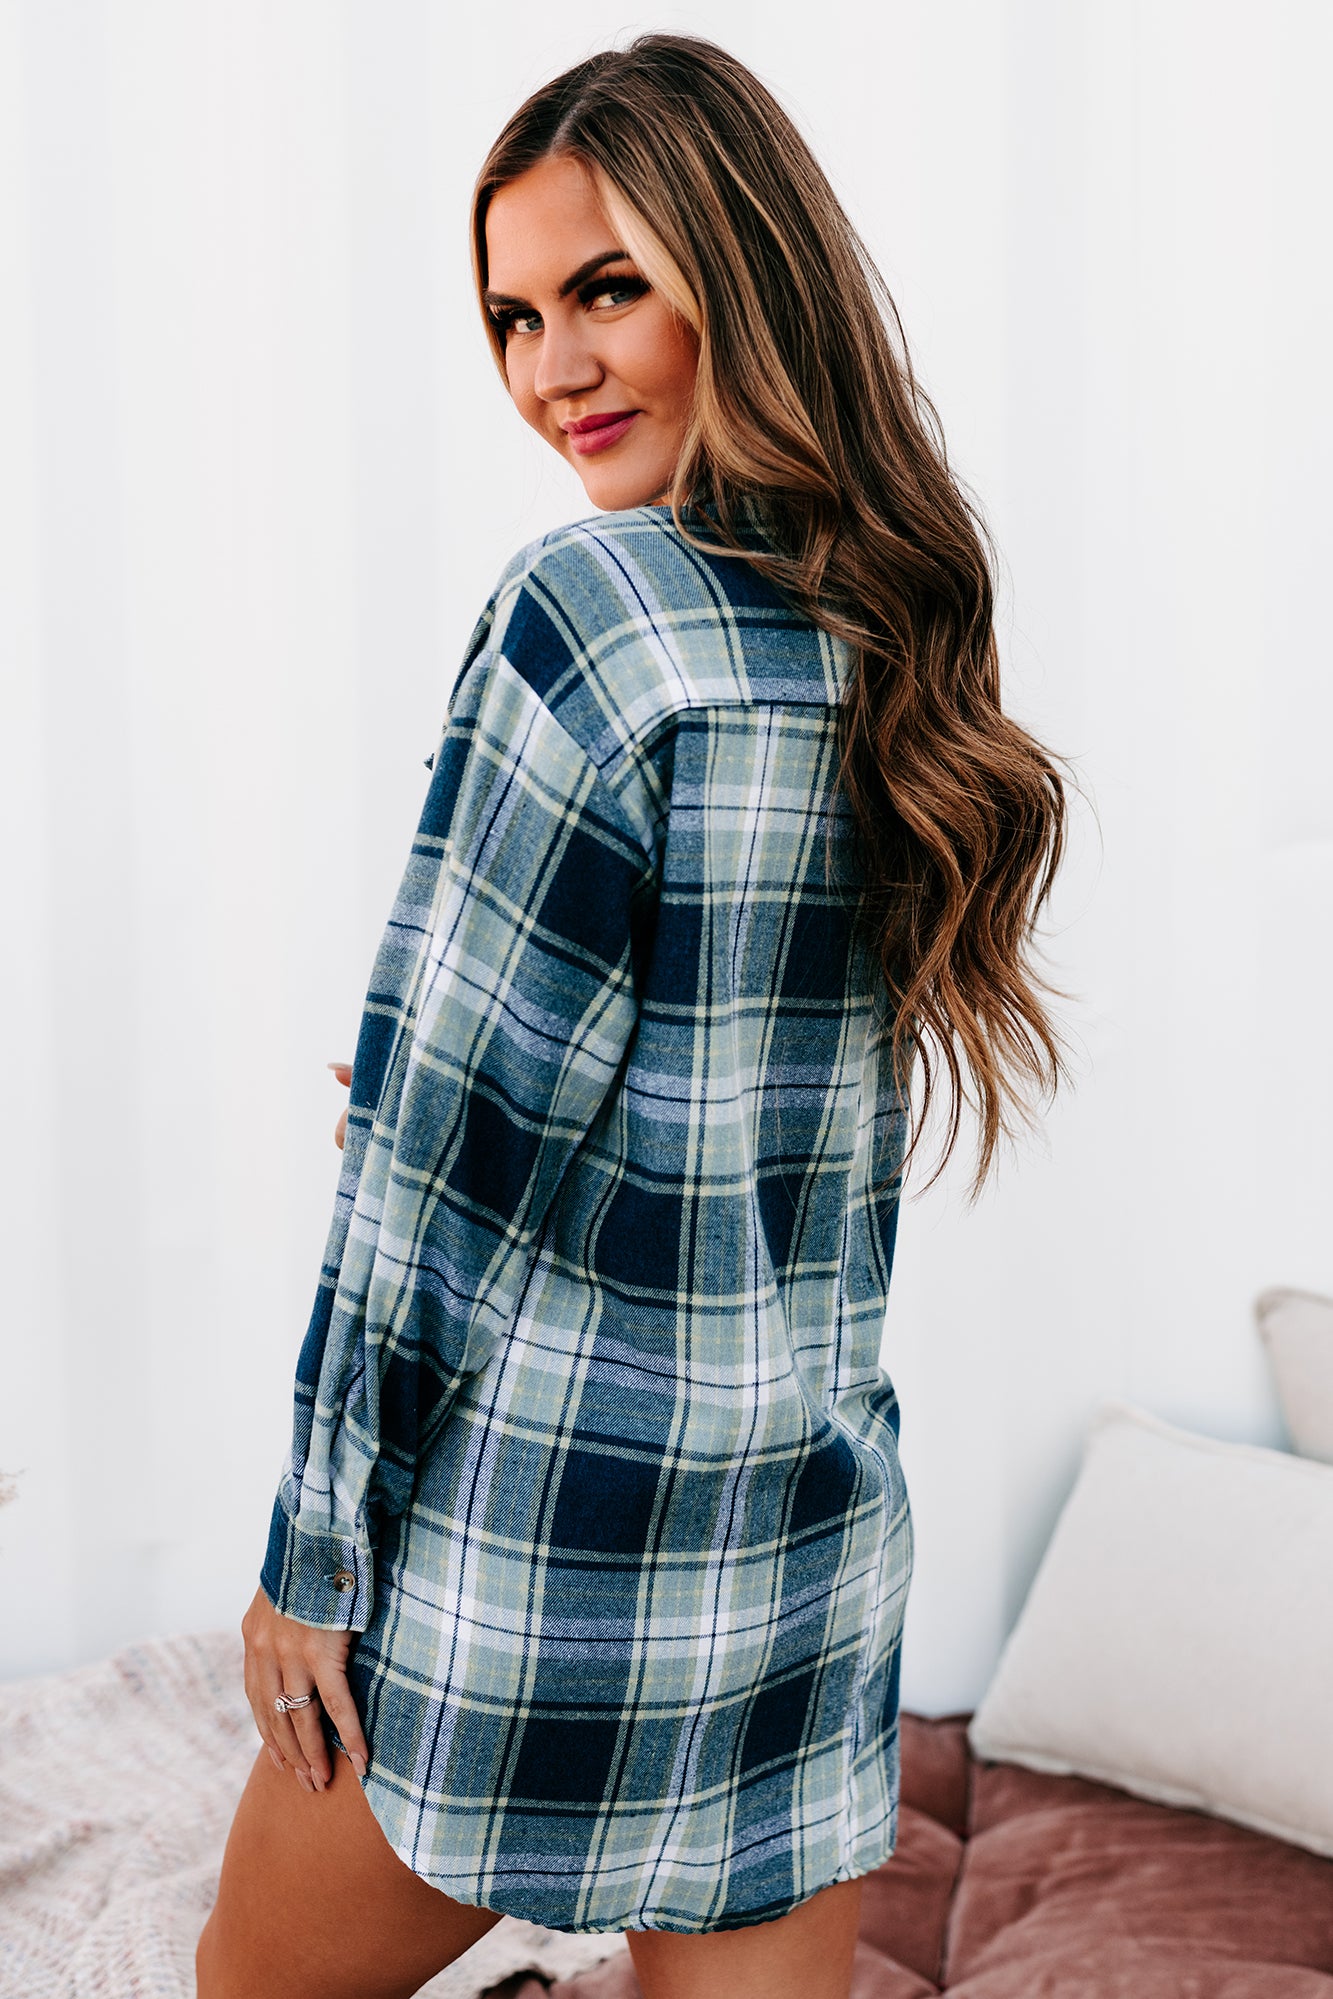 Carefree Confidence Oversized Plaid Button-Down Top (Navy) - NanaMacs